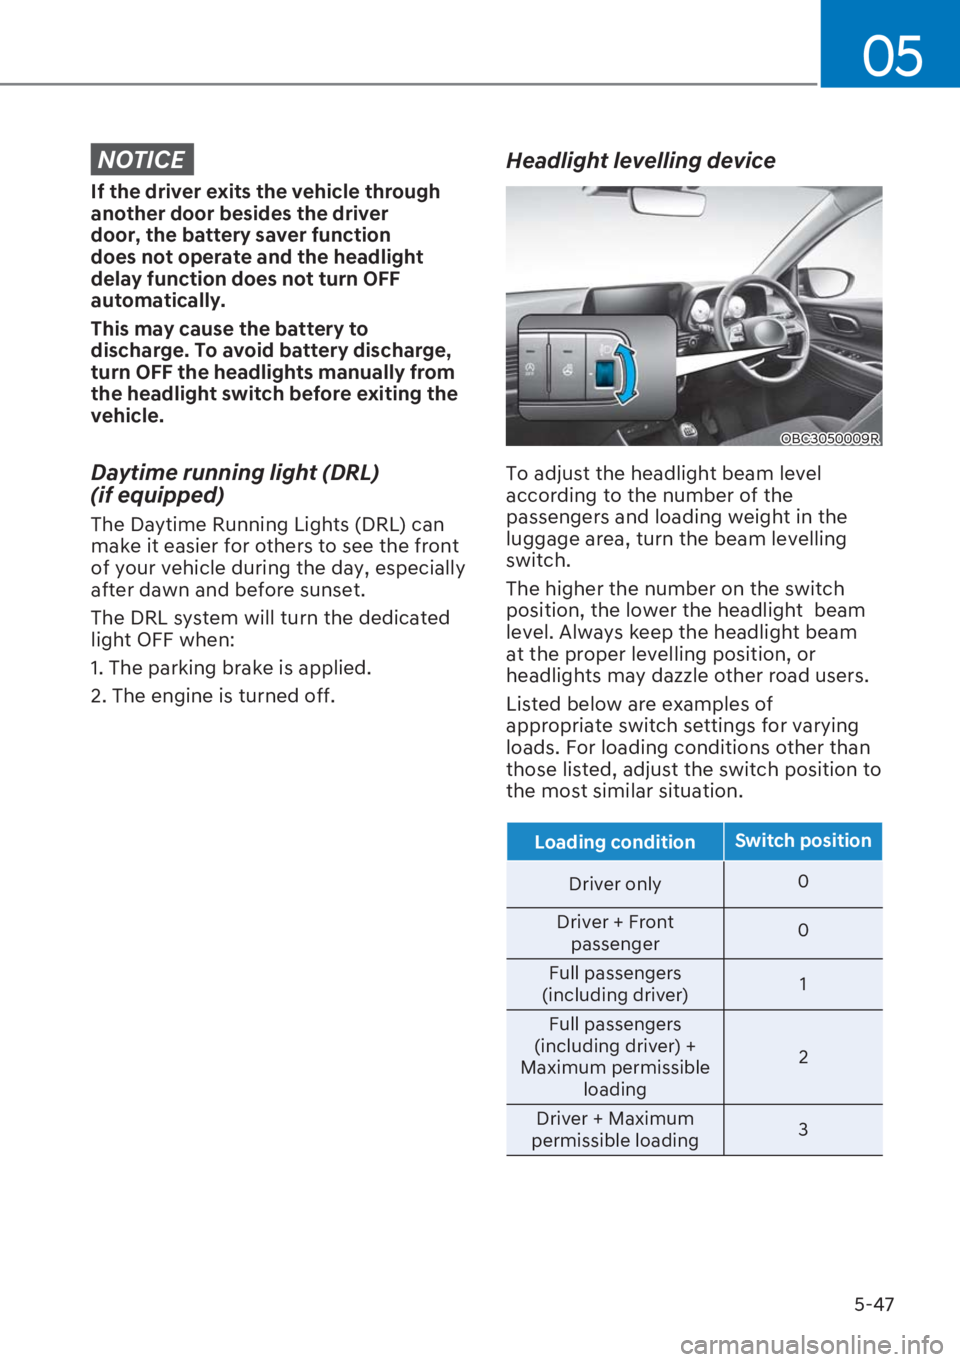 HYUNDAI I20 2023  Owners Manual 5-47
05
NOTICE
If the driver exits the vehicle through 
another door besides the driver 
door, the battery saver function 
does not operate and the headlight 
�G�H�O�D�\��I�X�Q�F�W�L�R�Q��G�R�H�V��